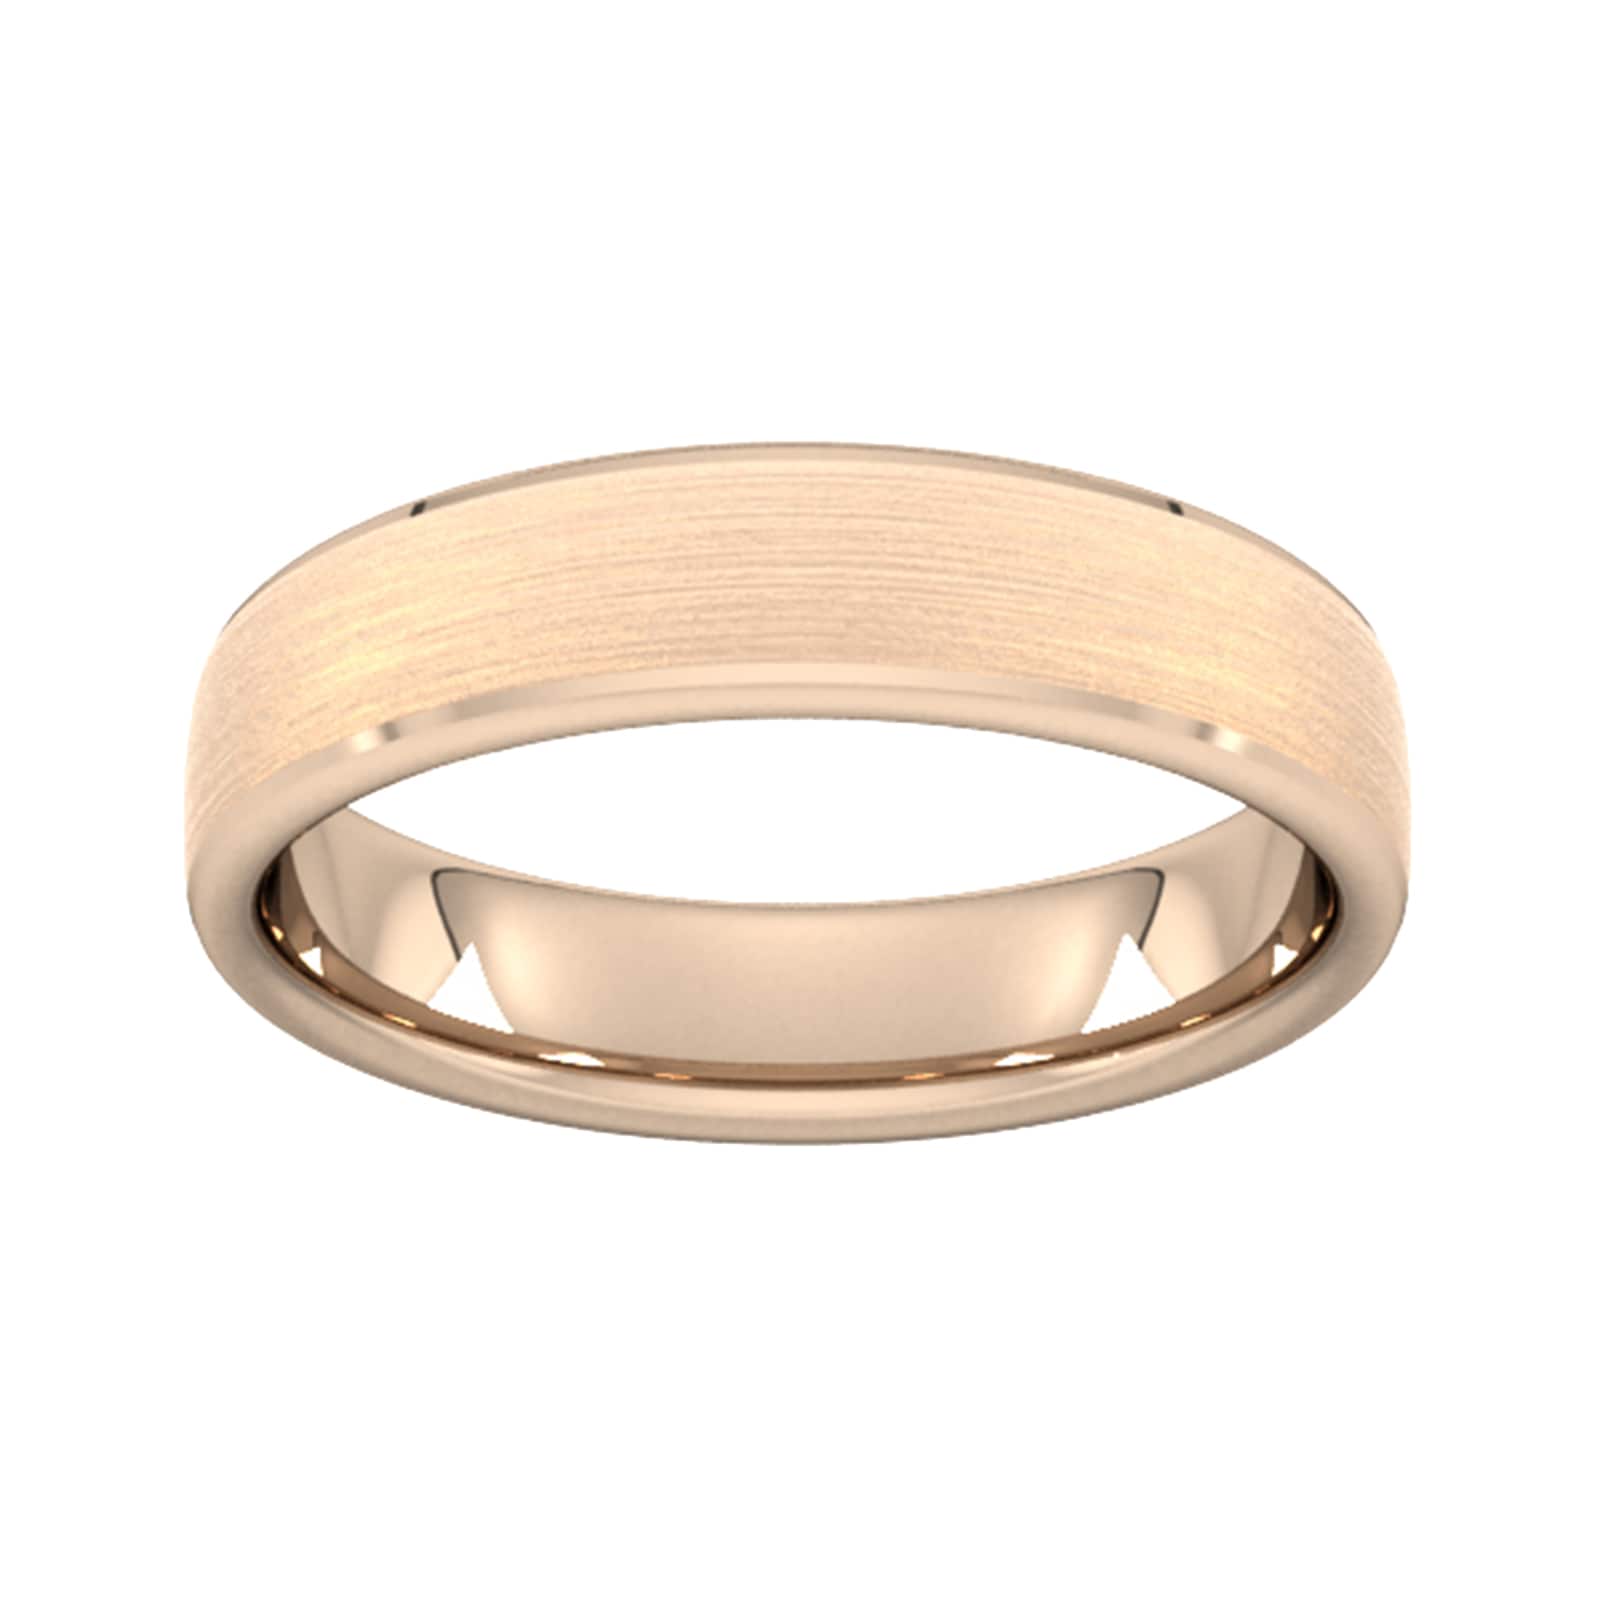 5mm D Shape Heavy Polished Chamfered Edges With Matt Centre Wedding Ring In 18 Carat Rose Gold - Ring Size N